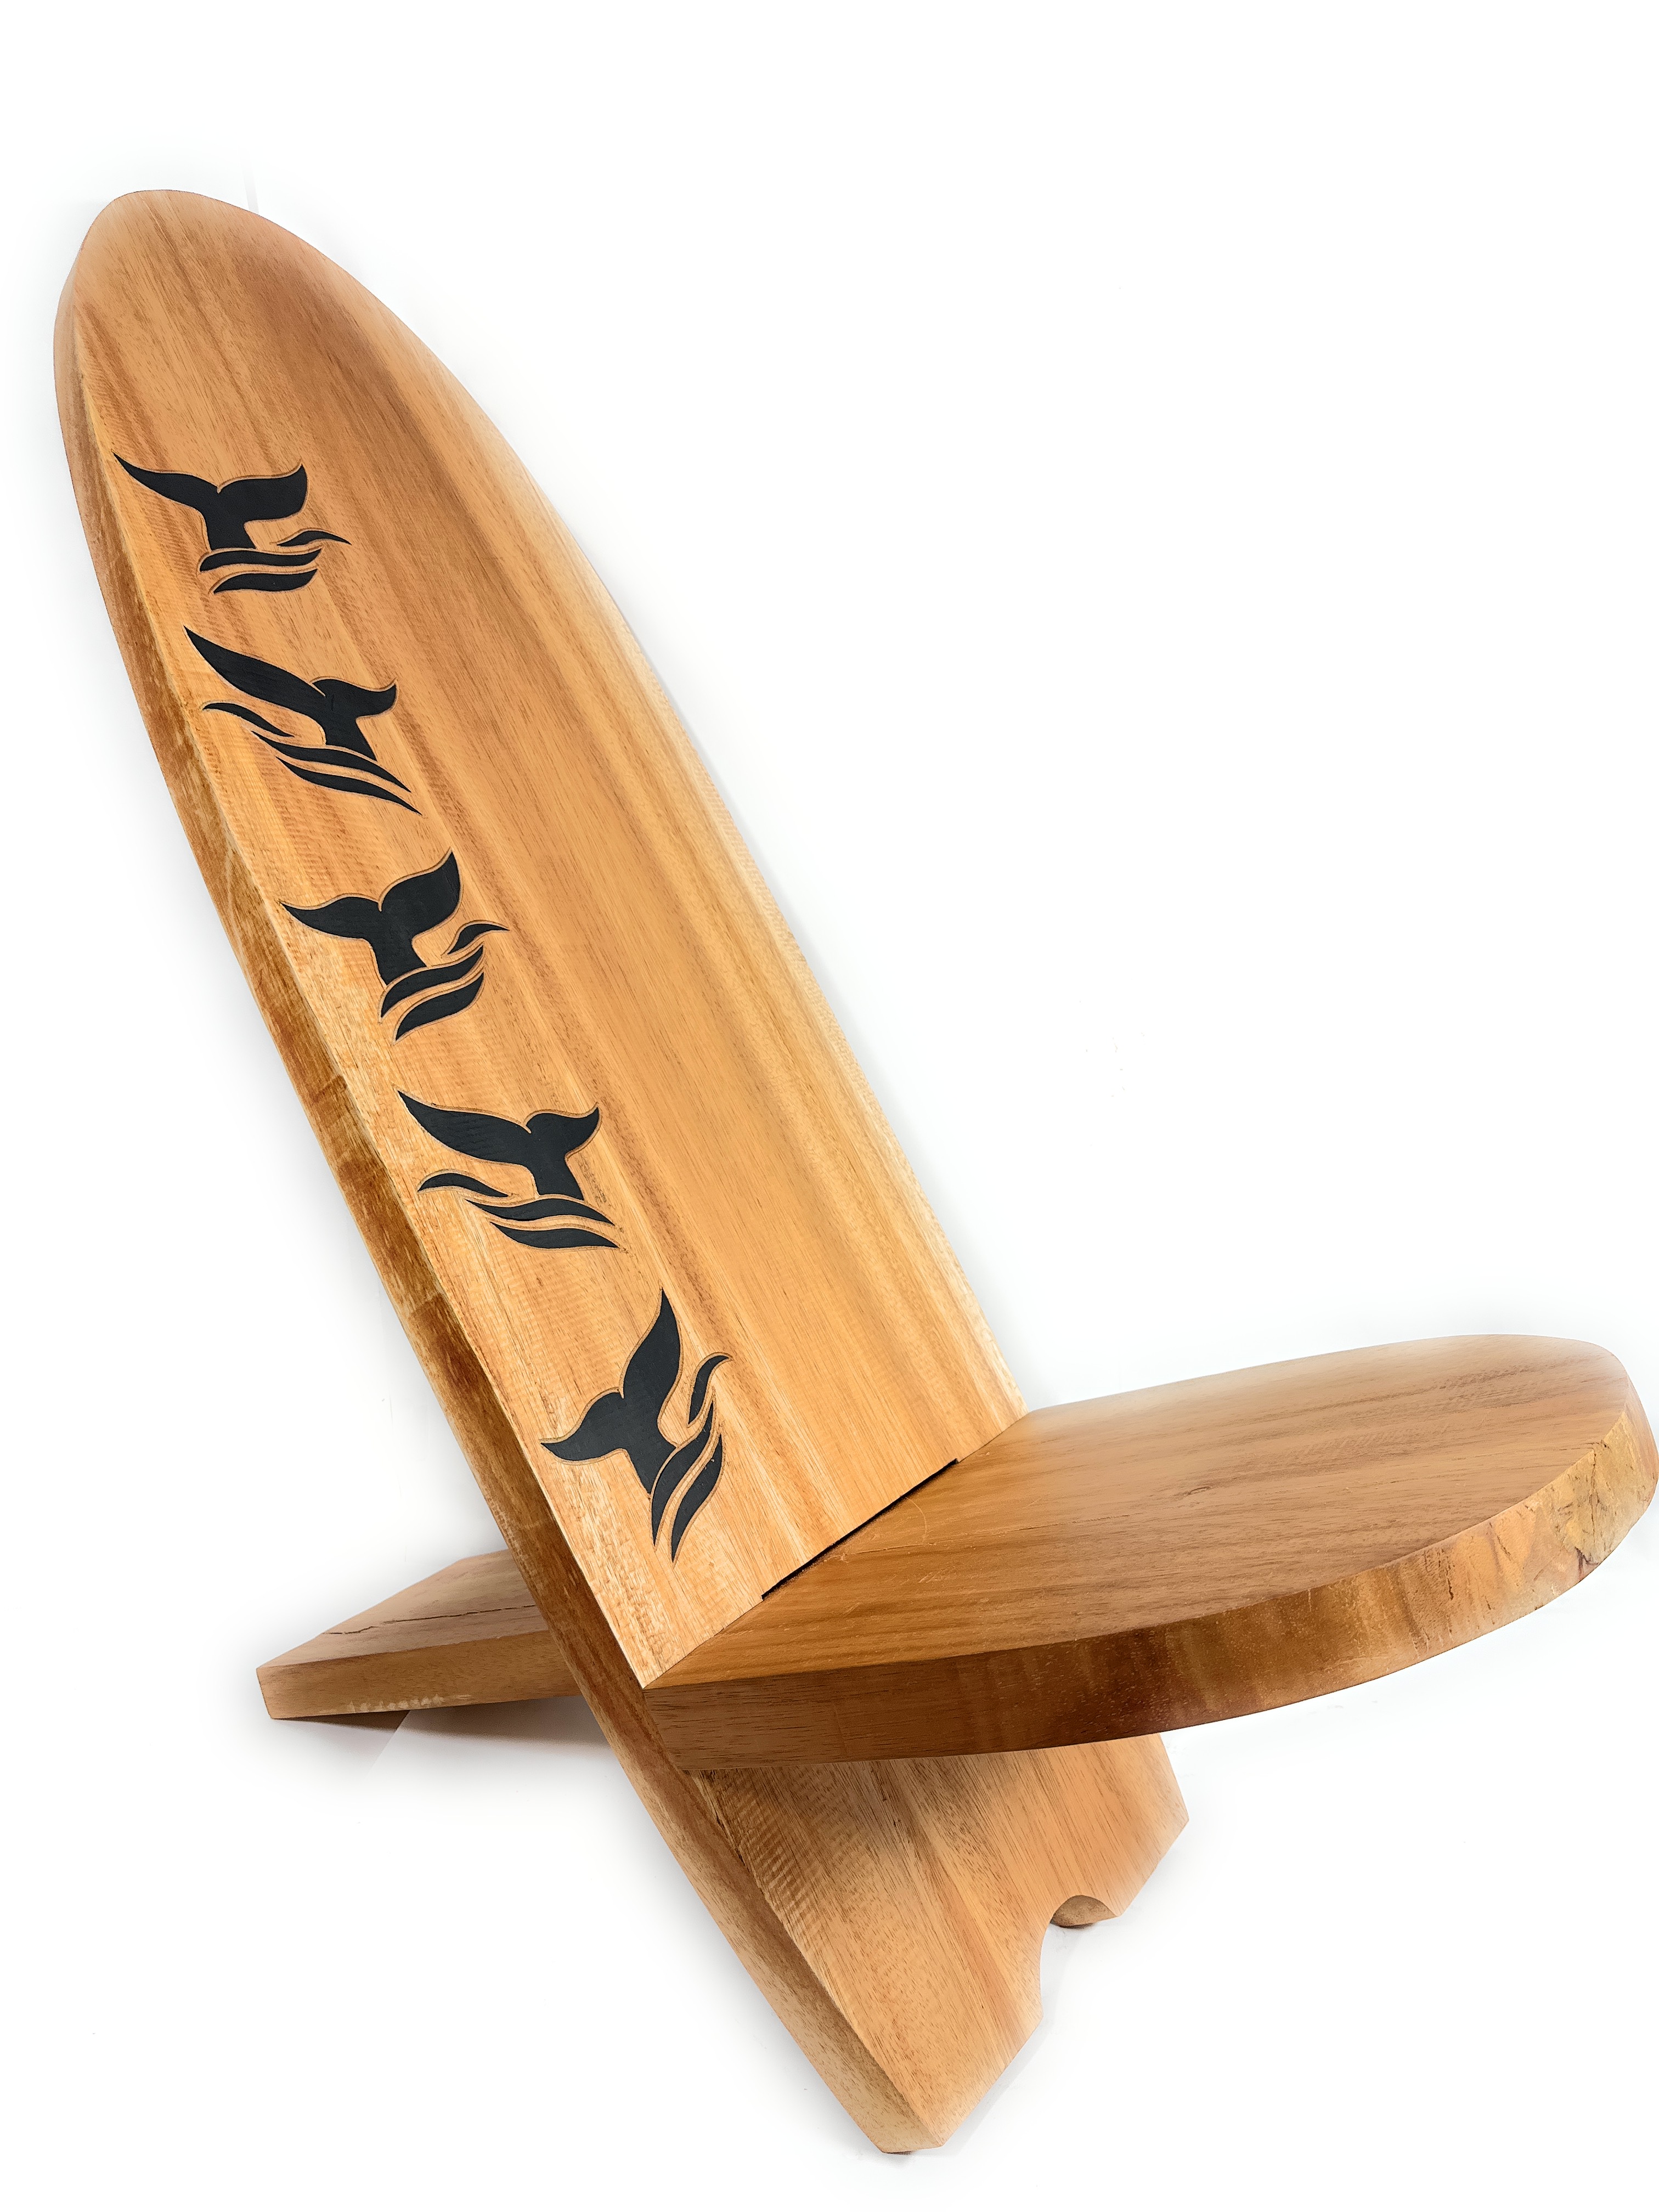 Surfboard chair with whale tail etching